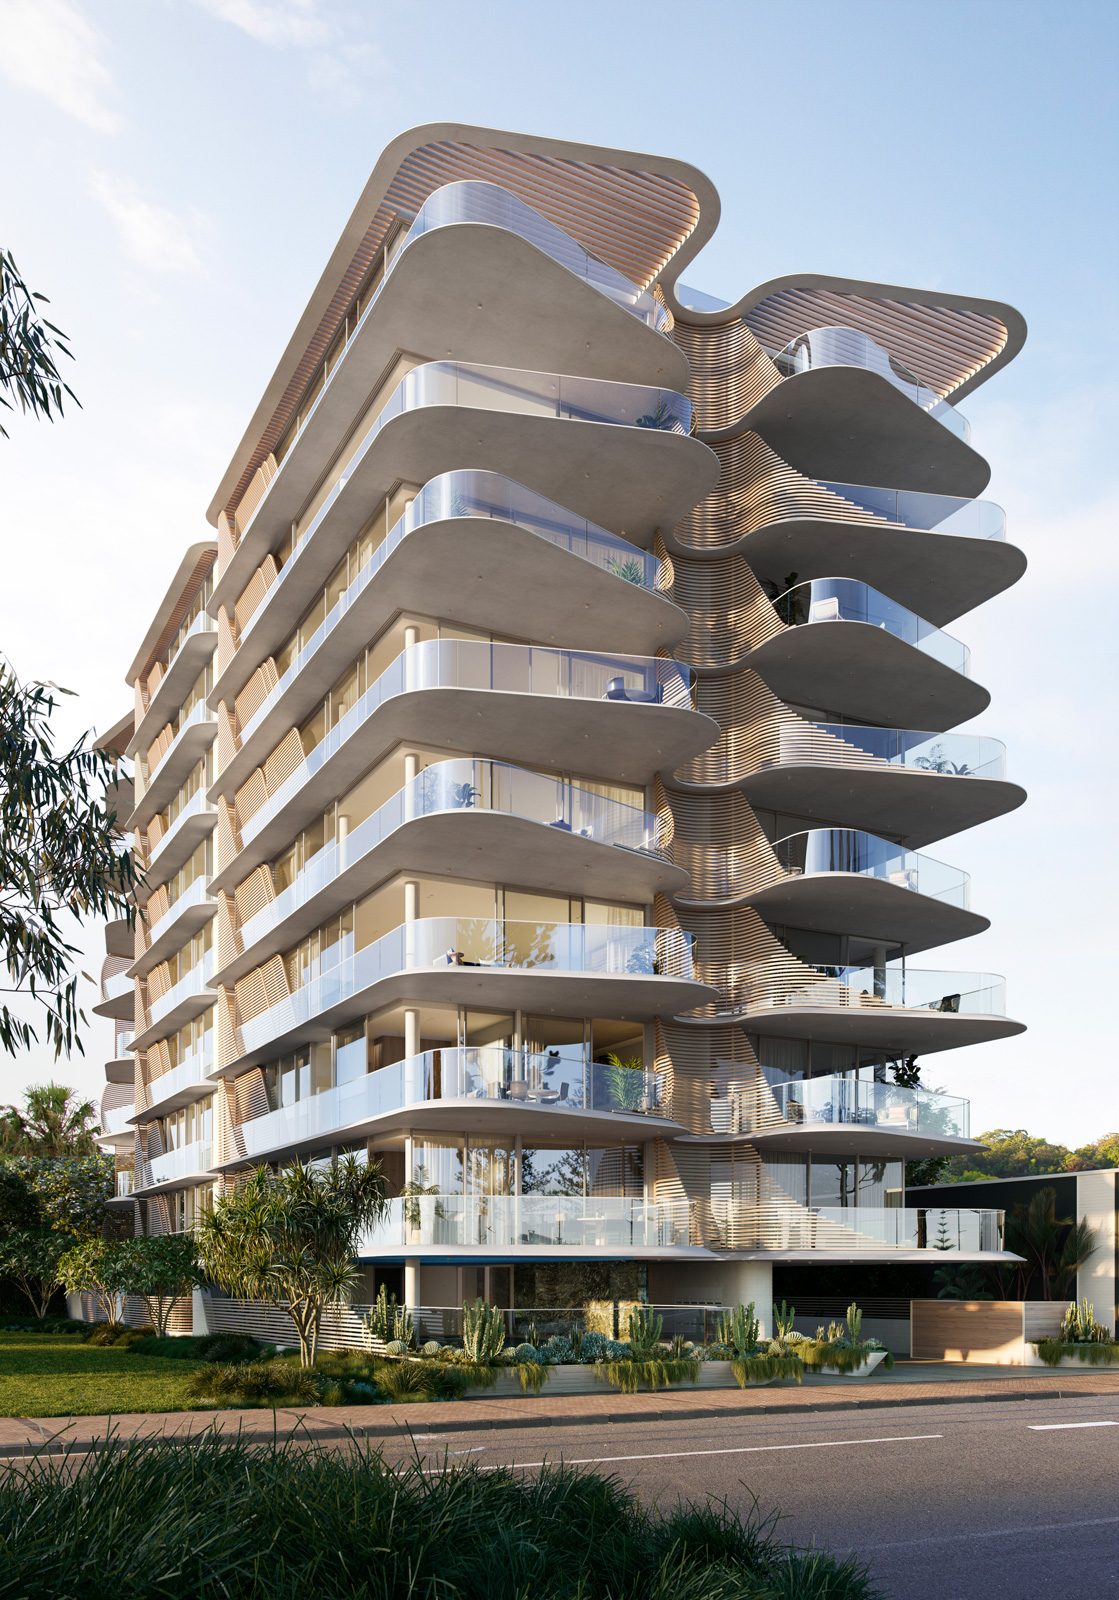 norfolk architecture building facade takada koichi burleigh residential heads architects hotel apartment apartments curve beach modern arquitectura form lumion sydney